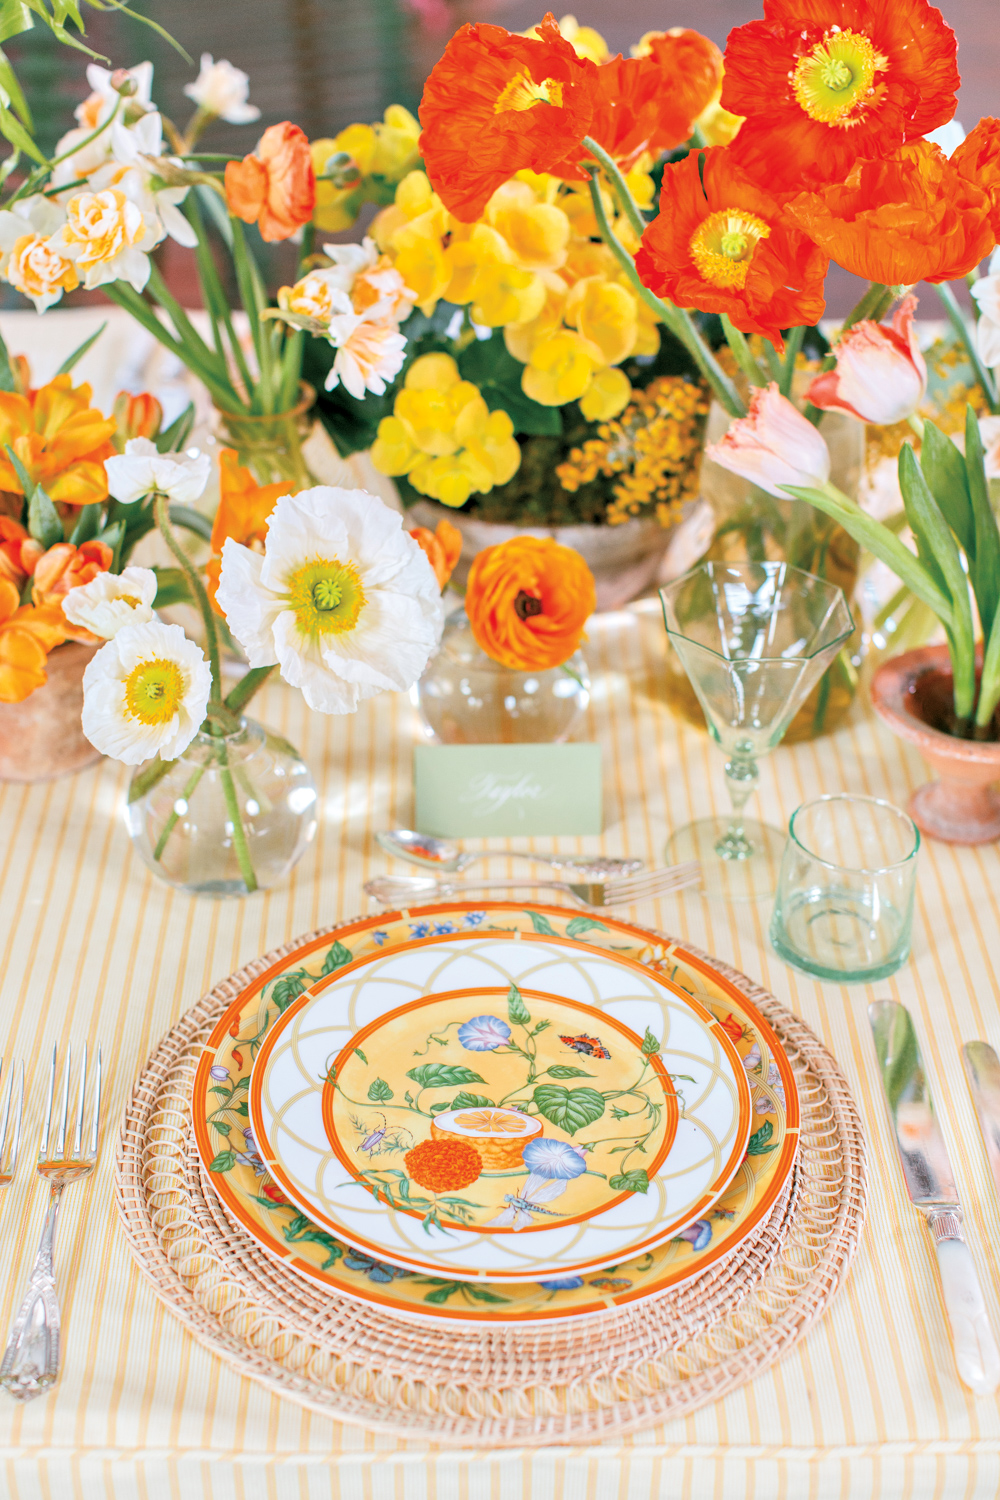 Styled tabletop with yellow and orange floral arrangements and place settings.